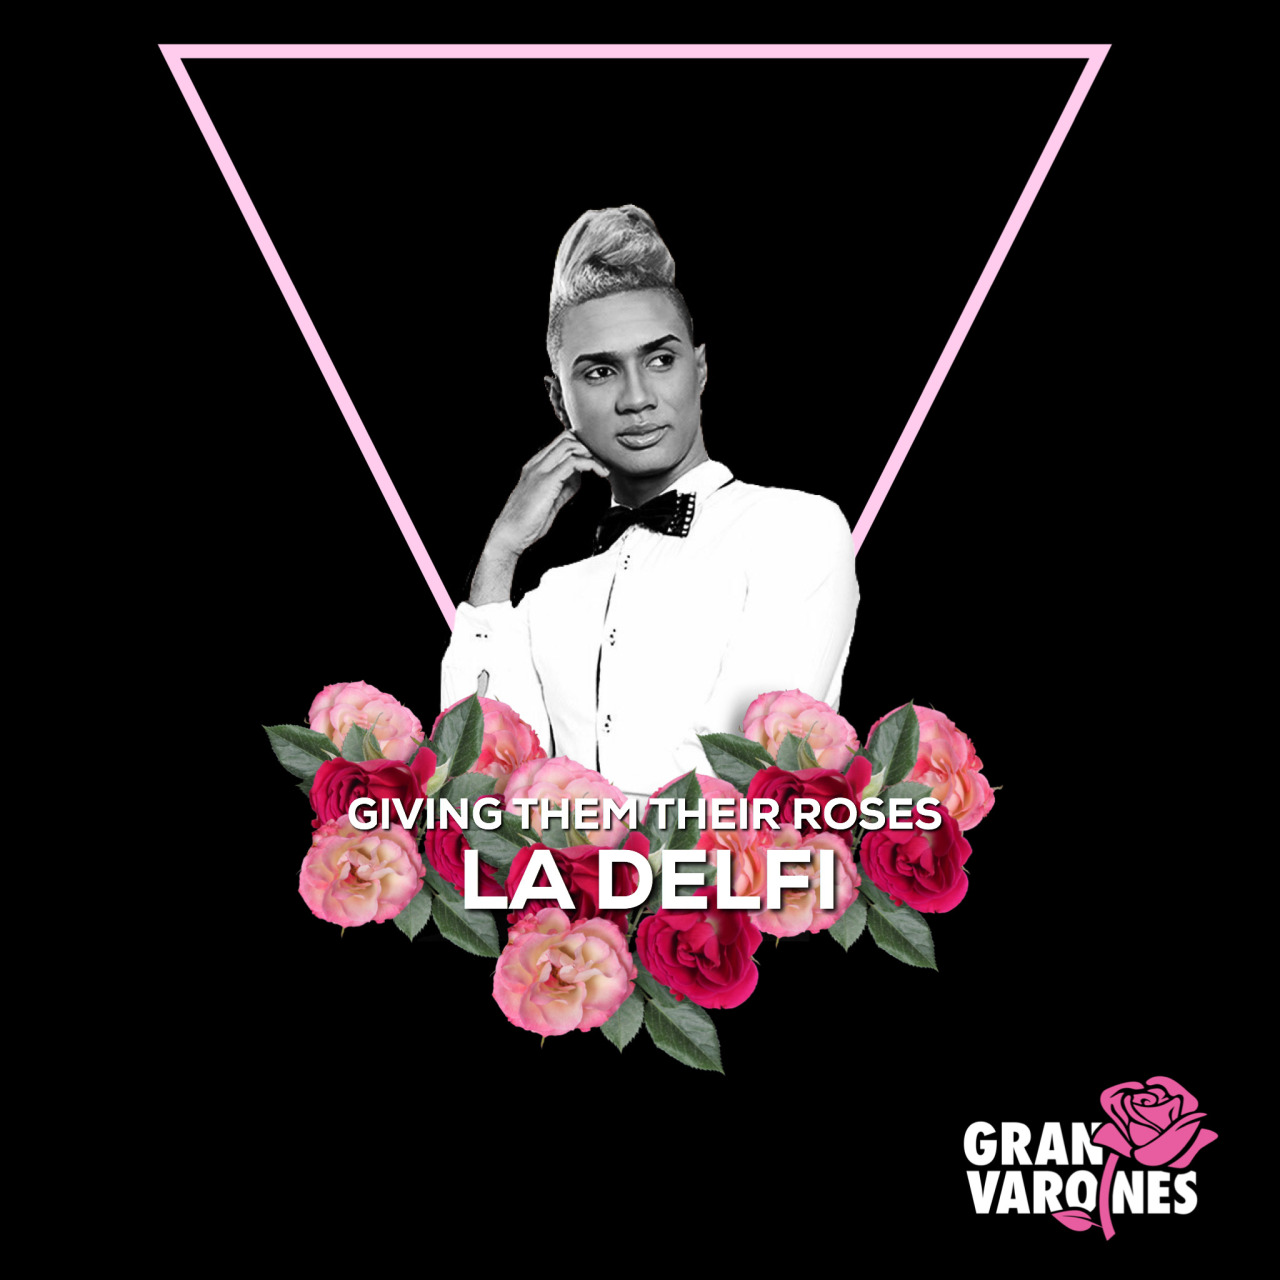 La Delfi was a pioneer and visionary. To carve out a space in a music genre that has been and continues to be dominated by cis-het men, La Delfi forged just of unprecedented successes for herself, but for queer dominican dembow artists including up...